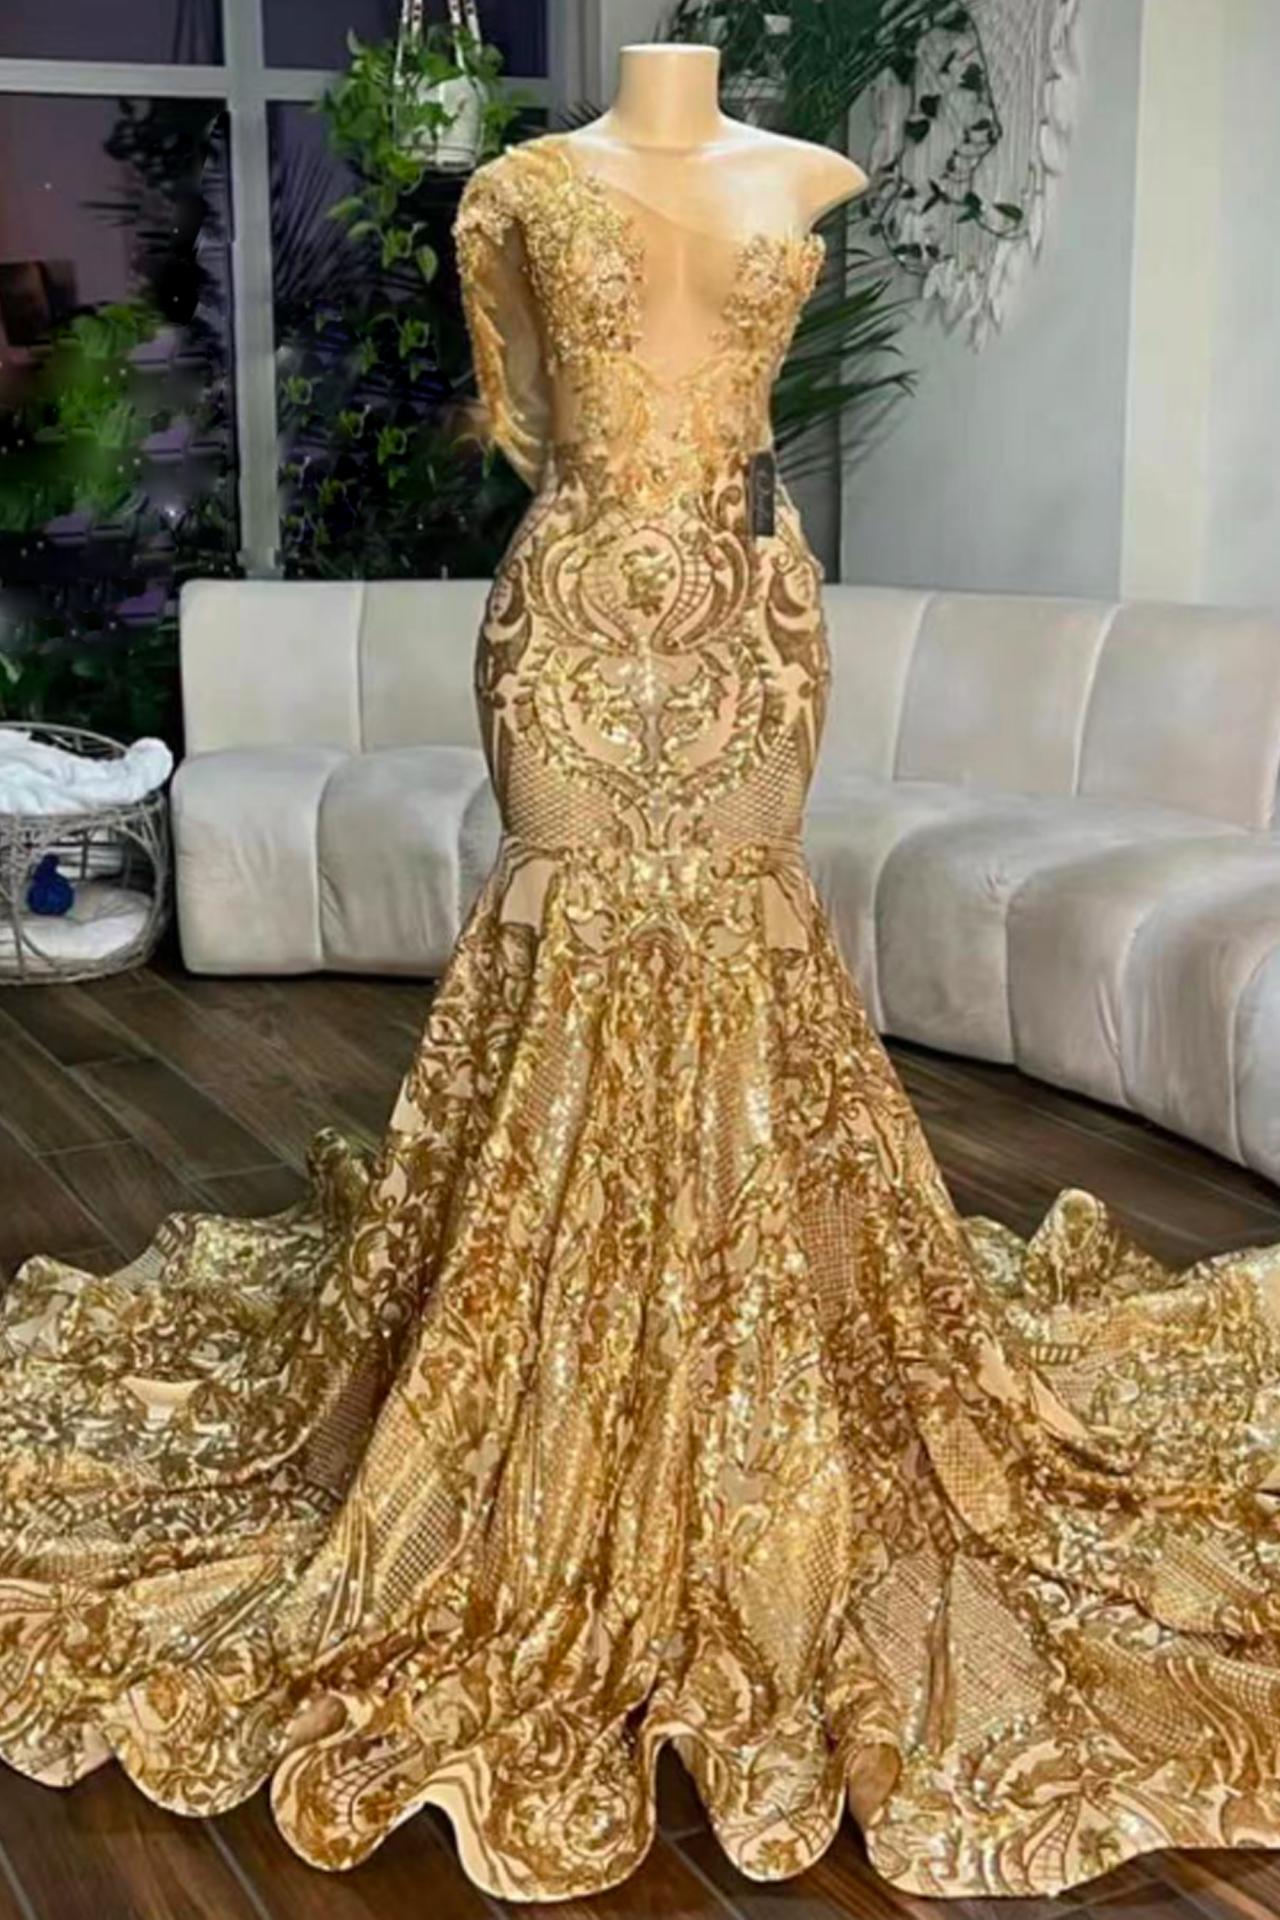 Gold Sequin Lace and Appliqué Dress, Elegant Prom Dress, Gold Evening Dress,  Wedding Reception Dress, African Lace Evening Gown, 